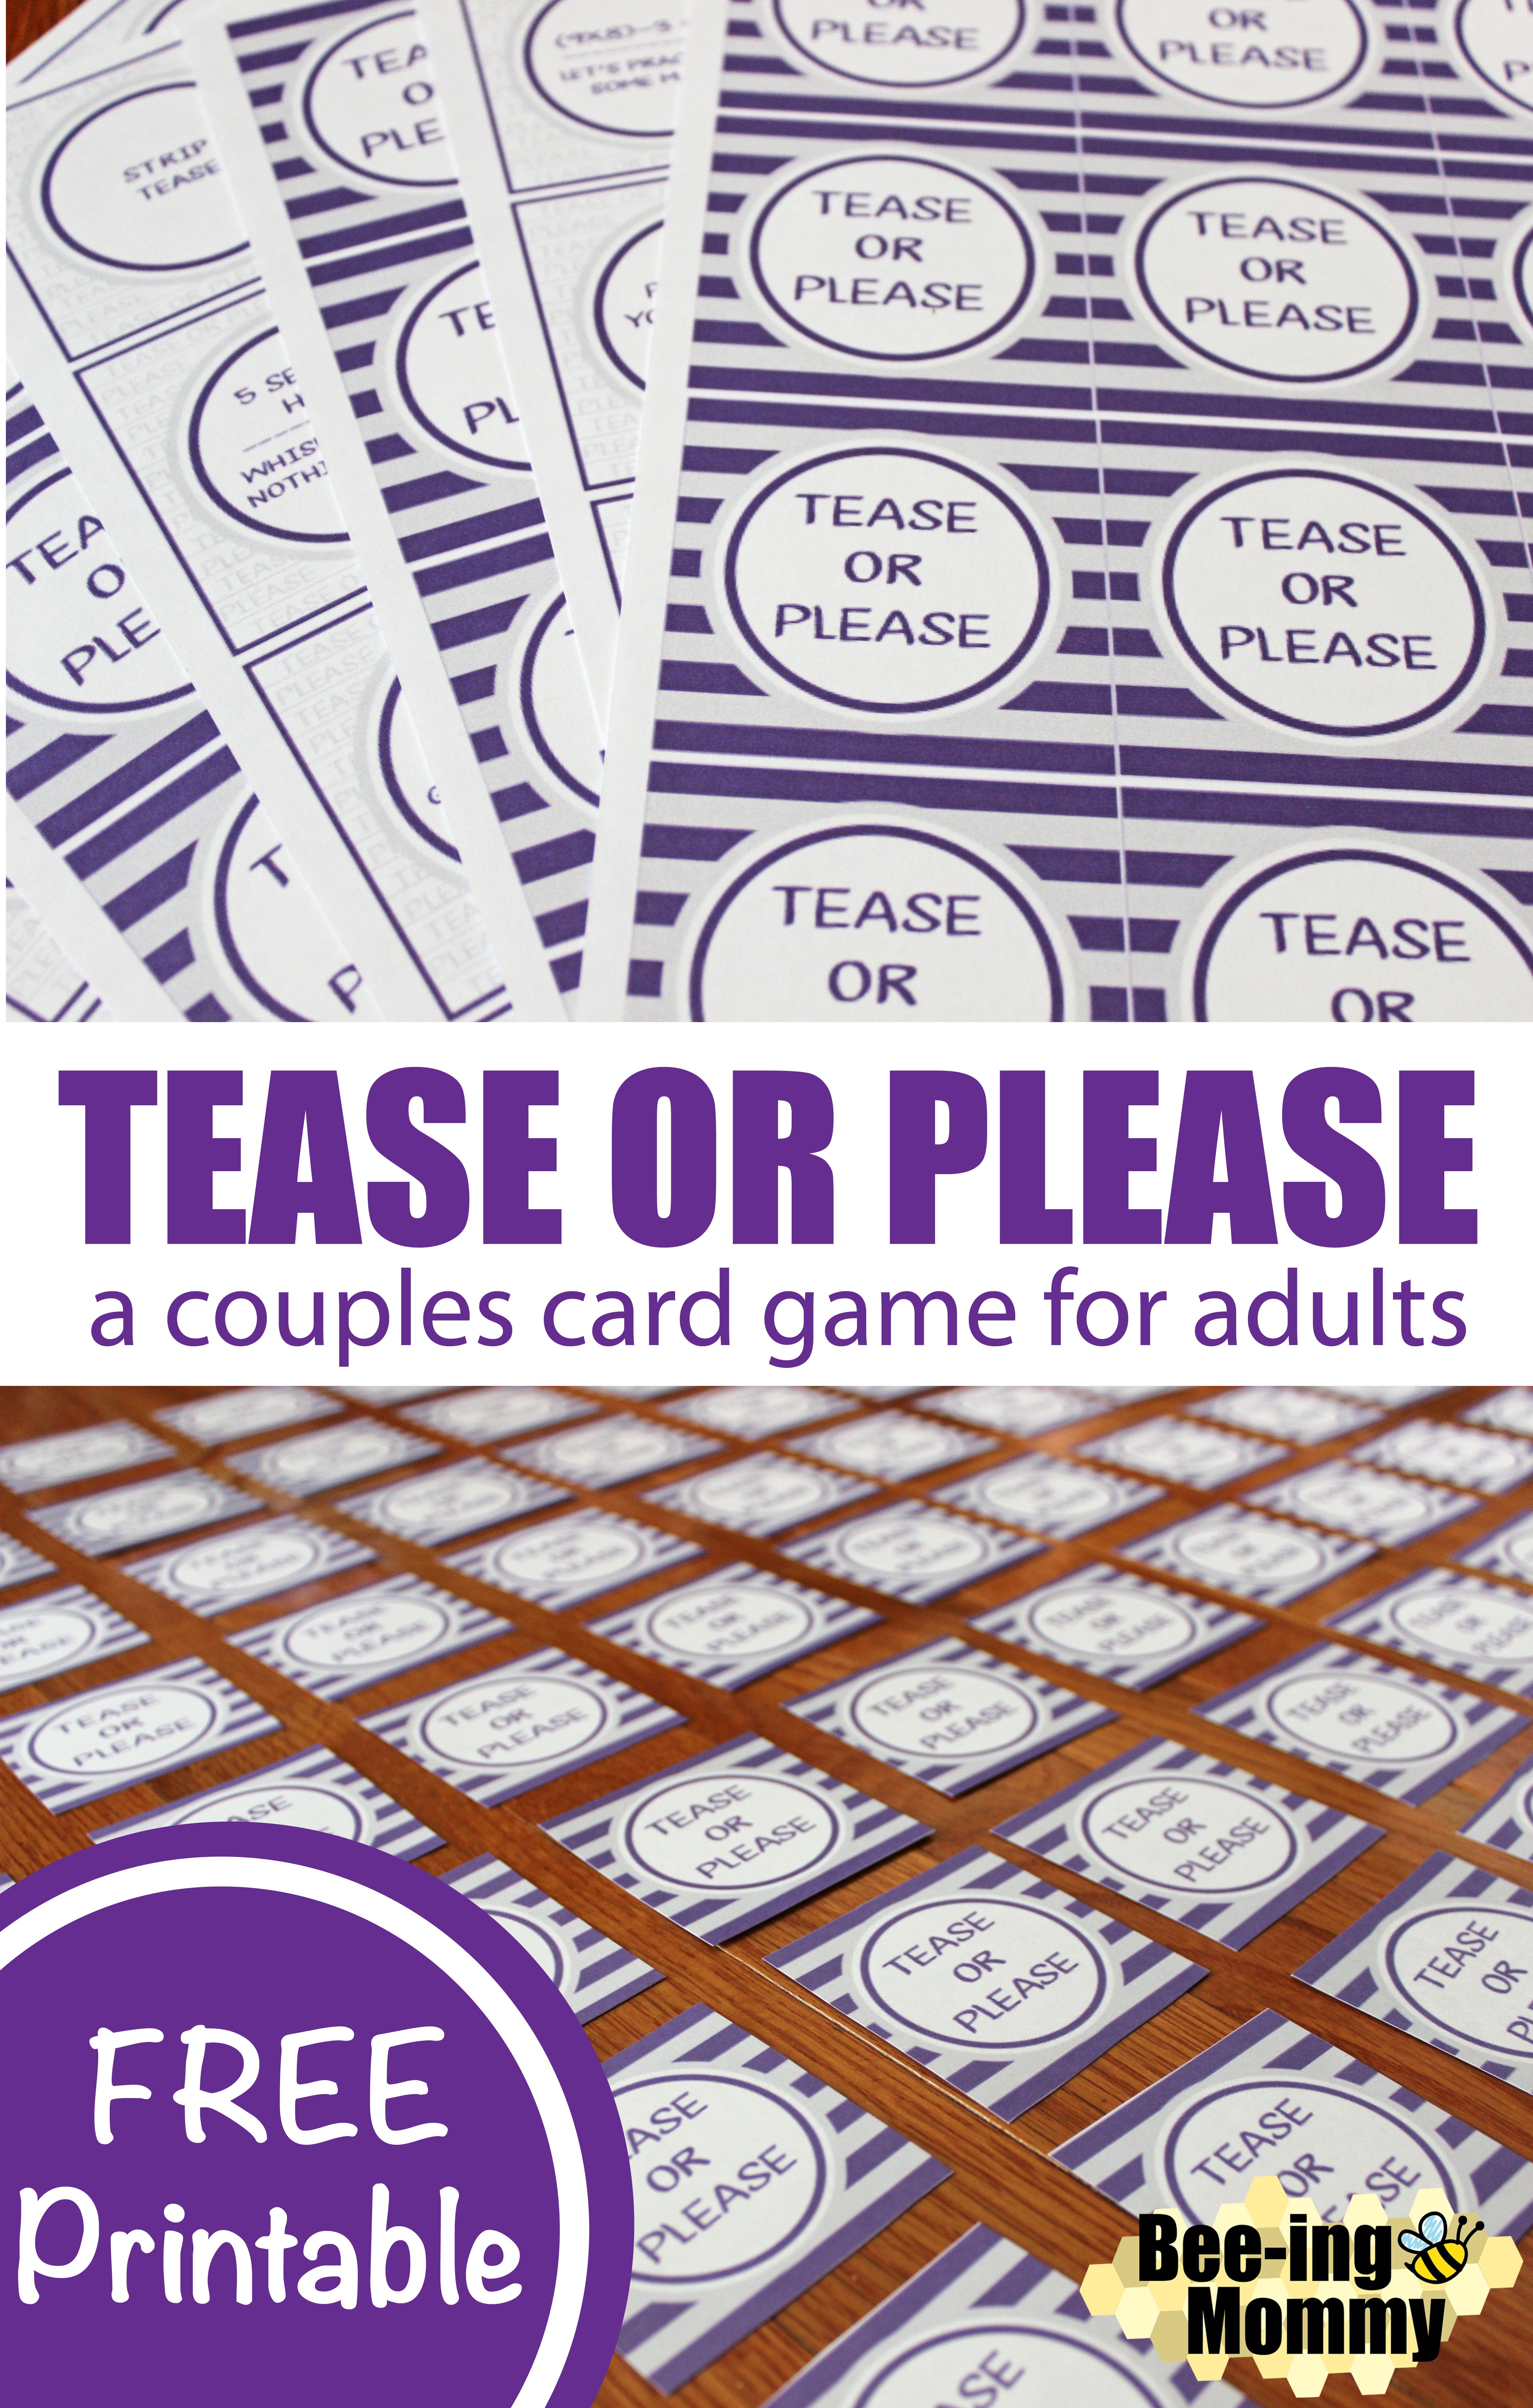 Adult home made games